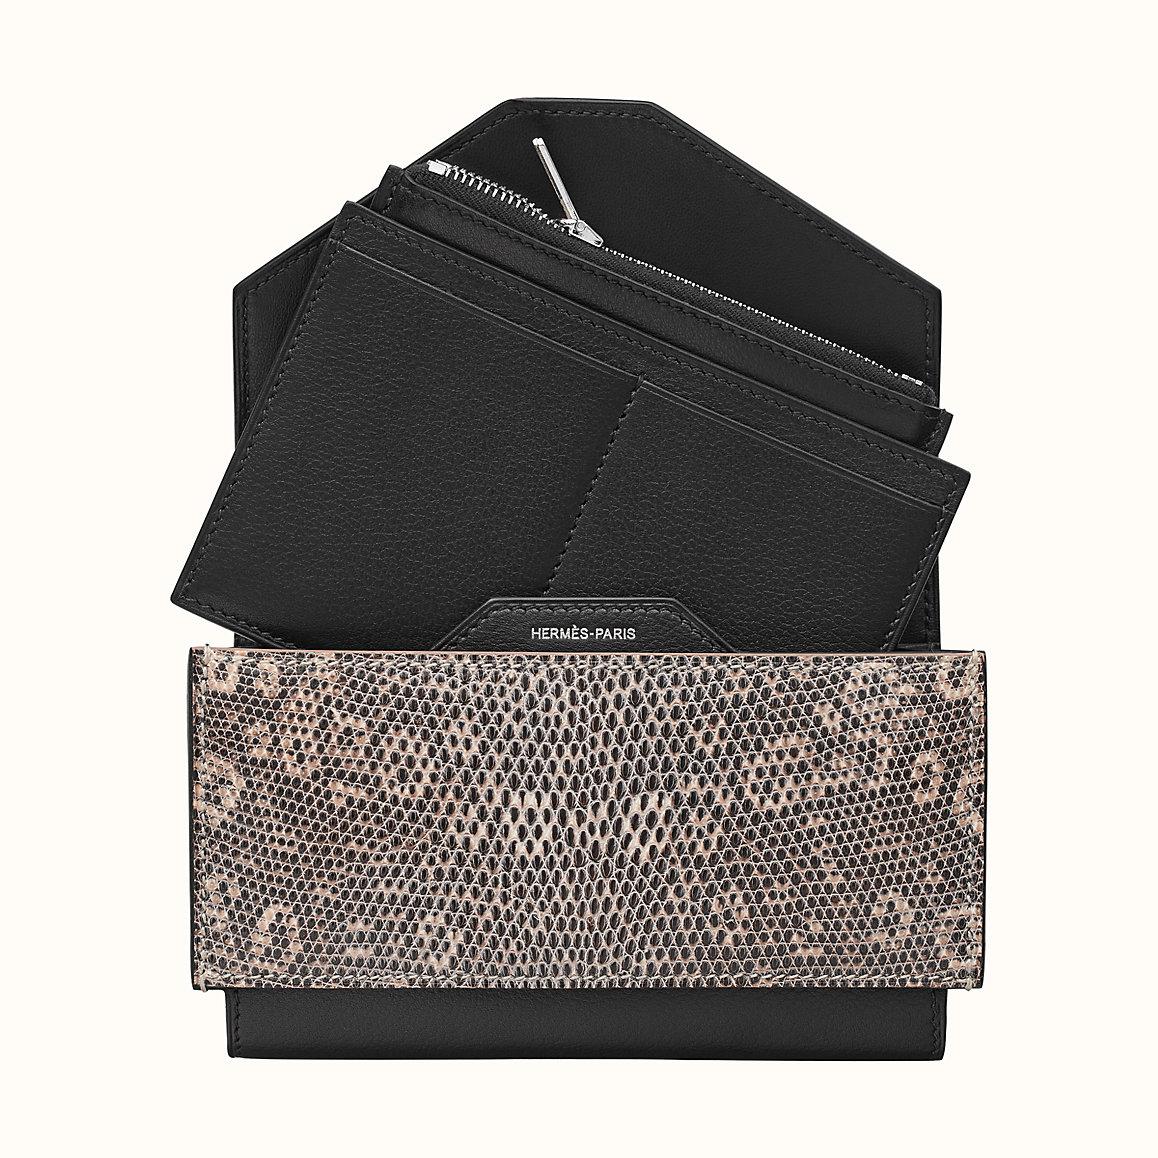 Hermes NEW Leather Lizard Exotic Palladium Small Evening Cardholder Pouch Clutch Wallet in Box 

Leather 
Lizard
Palladium-plated hardware
Fold-in flap closure
Date code present
Made in France
Measures 5